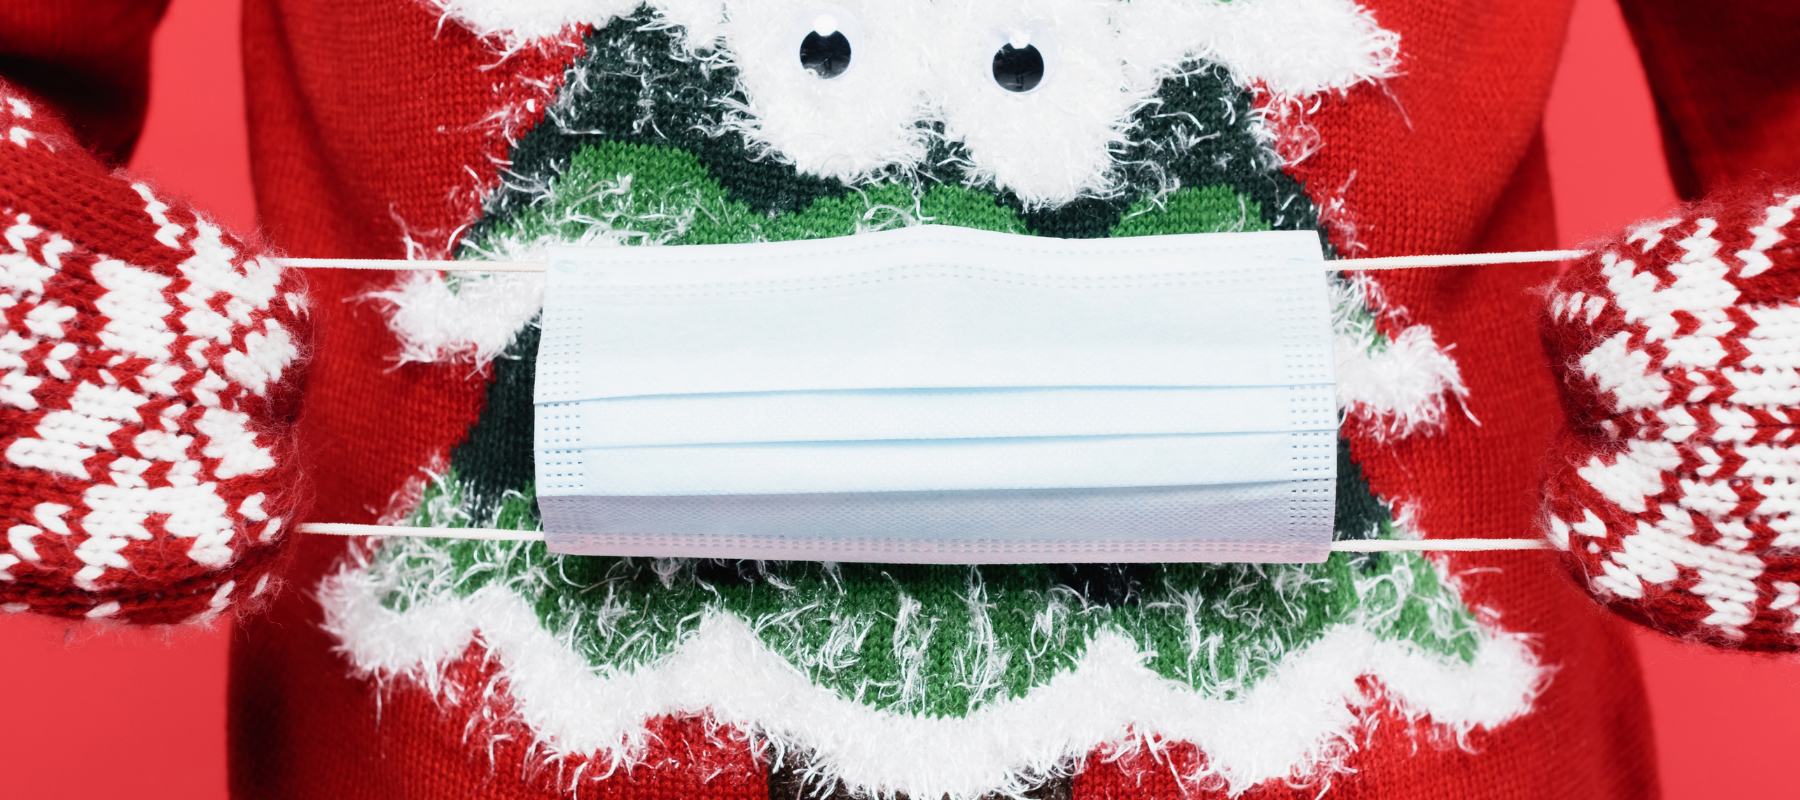 Closeup of disposable face mask stretched over holiday sweater of a Christmas tree.